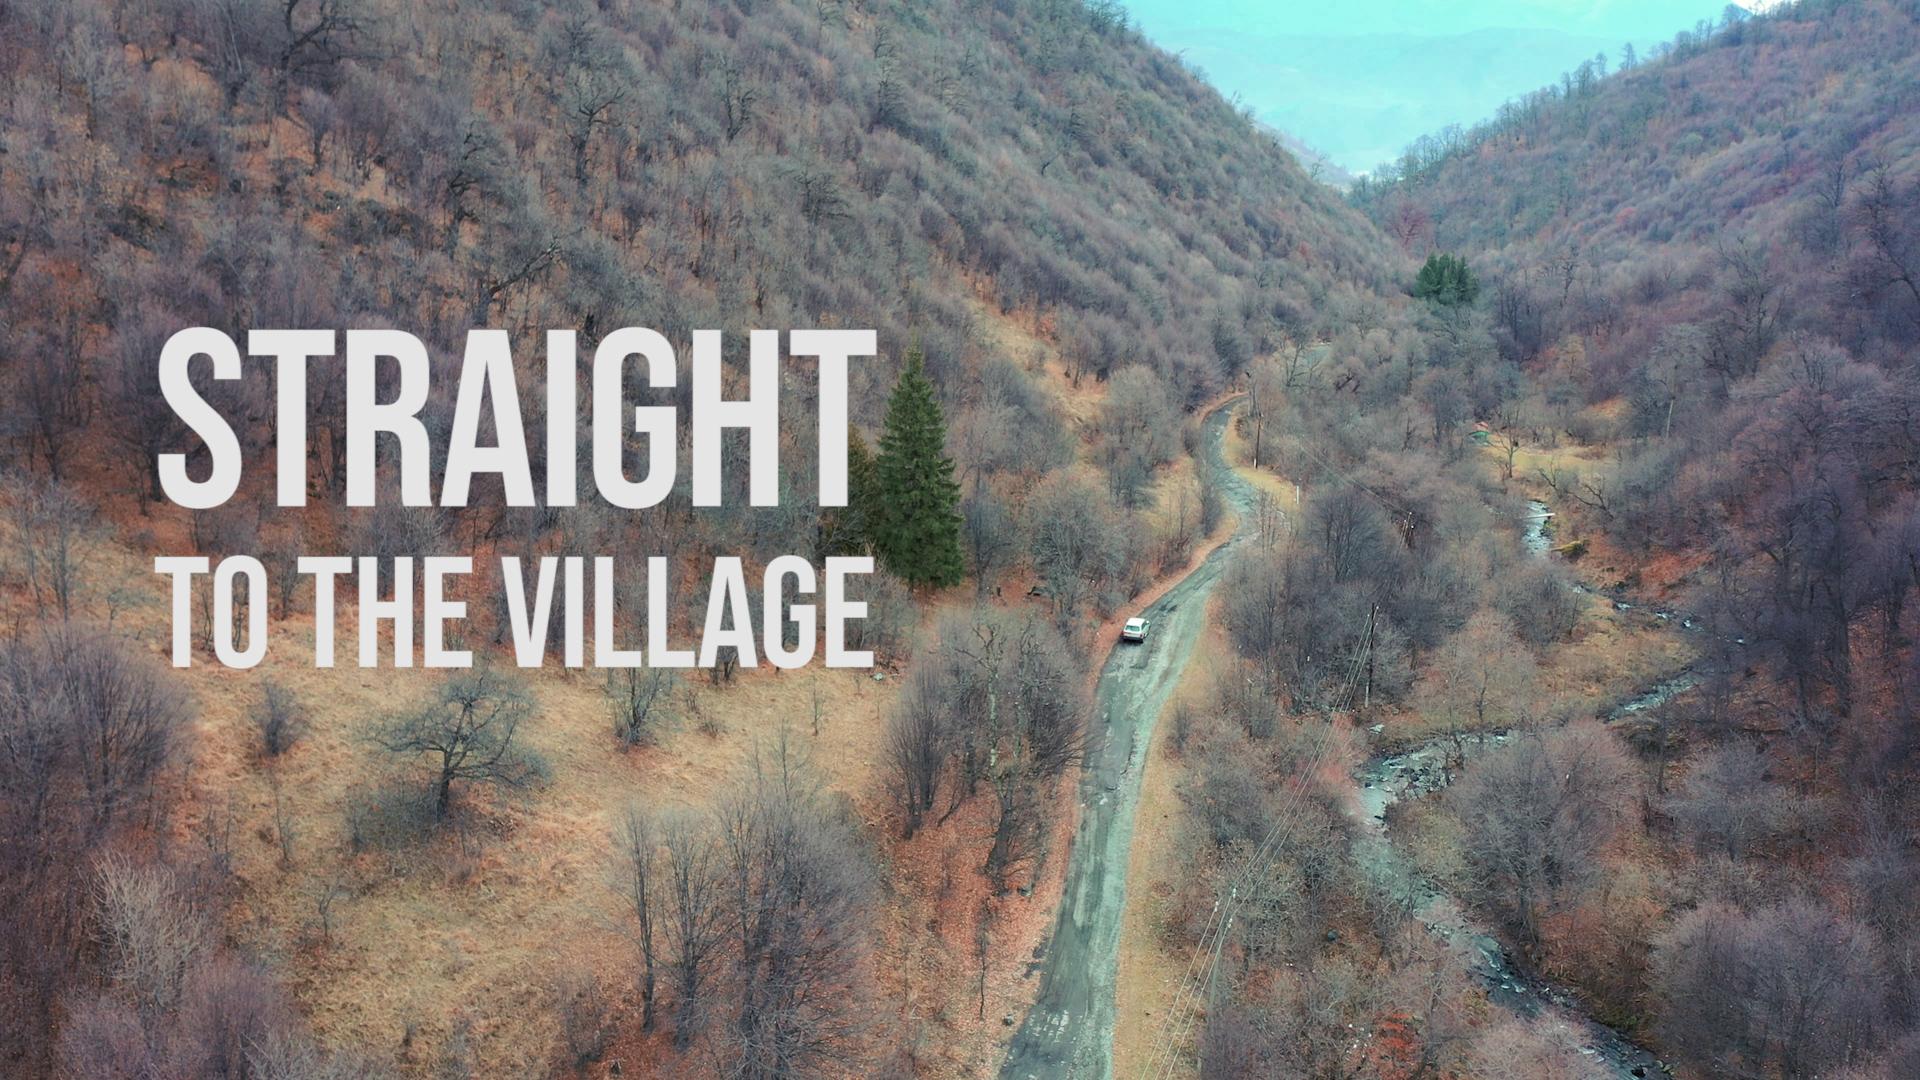 STRAIGHT TO THE VILLAGE Returns to CivilNet with a New Season